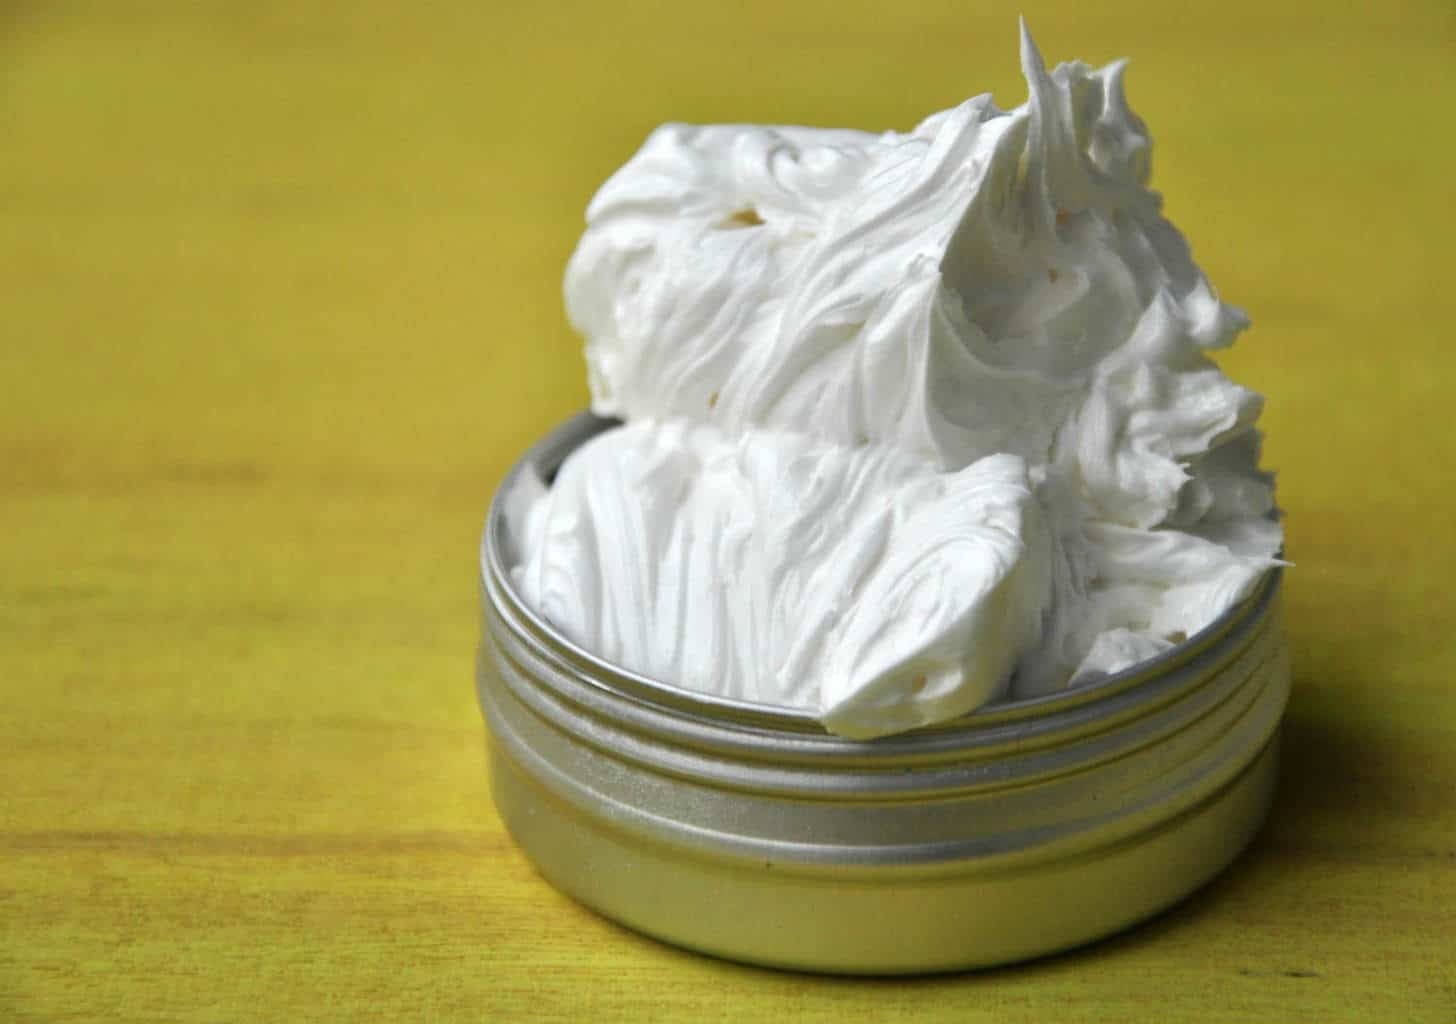 Shea Butter & Coconut Oil Lotion Recipe That Everyone Loves - DIY Beauty  Base